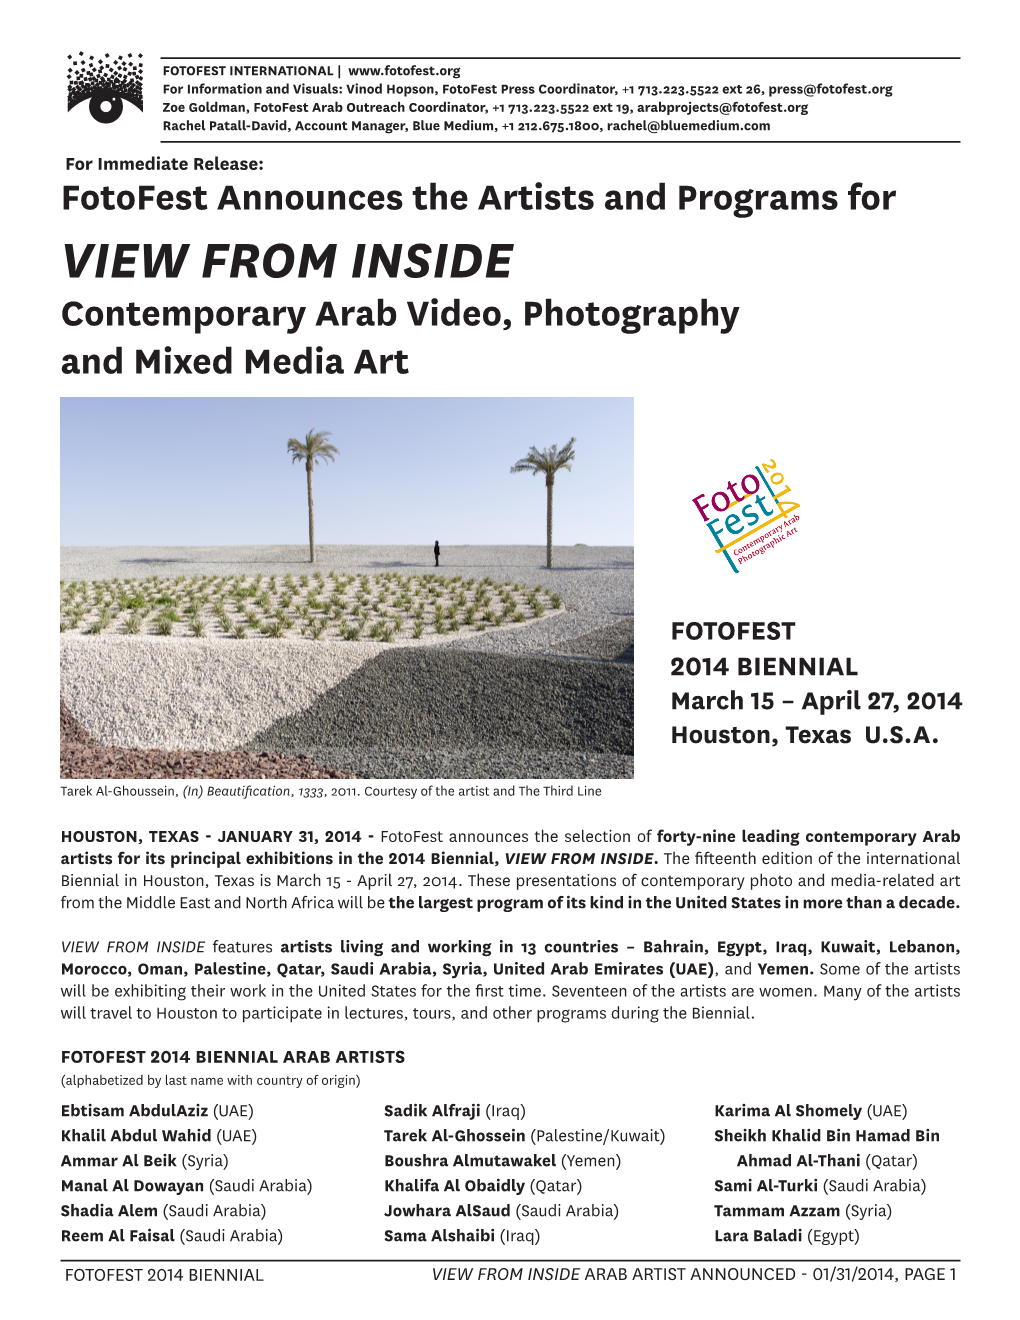 Fotofest Announces the Artists and Programs for VIEW from INSIDE Contemporary Arab Video, Photography and Mixed Media Art